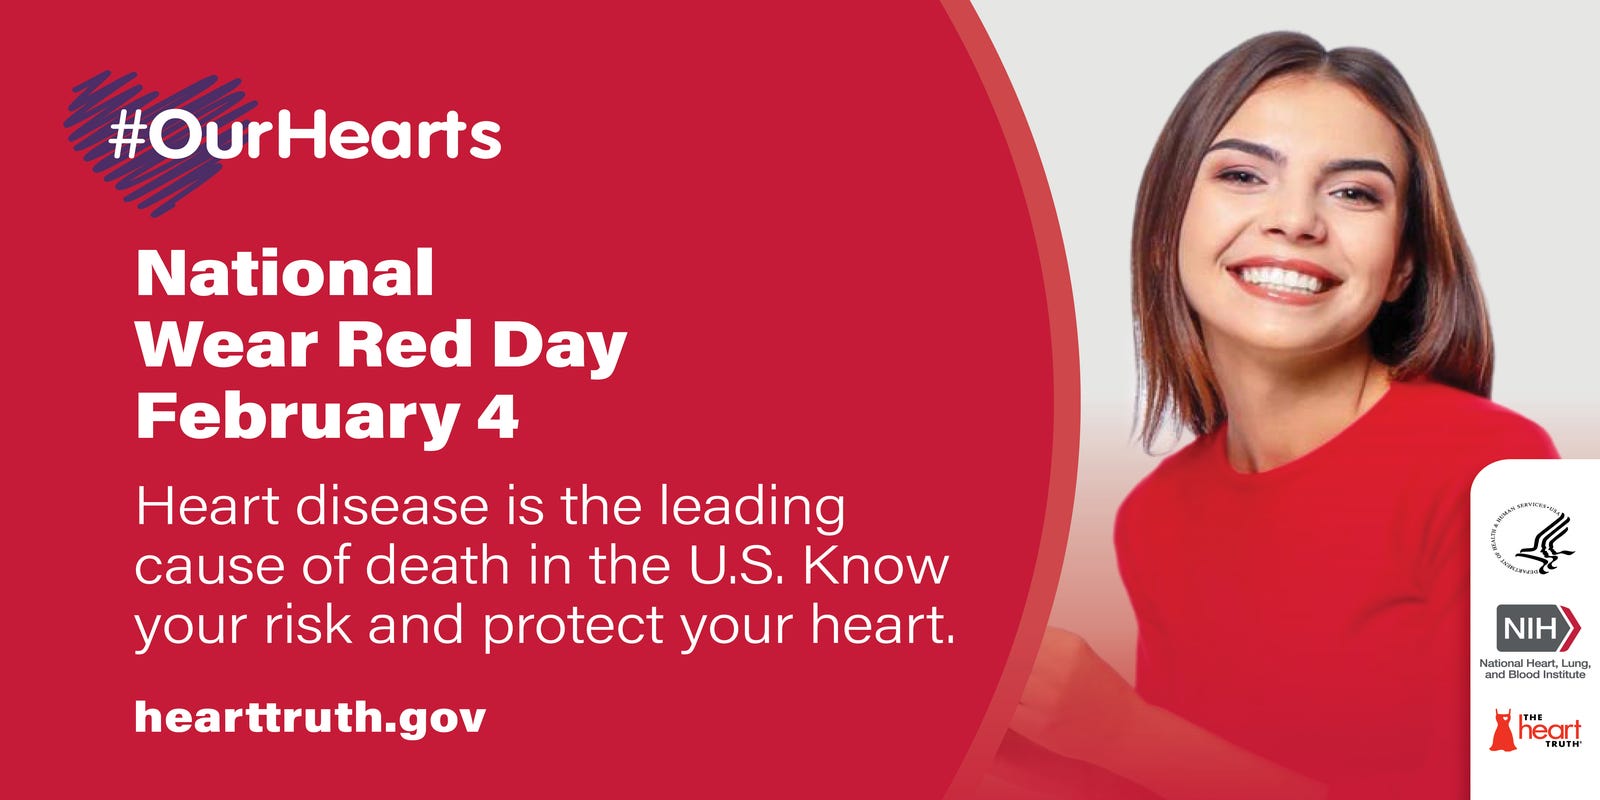 Prevention: Wear red Friday to support eradication of heart disease, women’s No. 1 killer